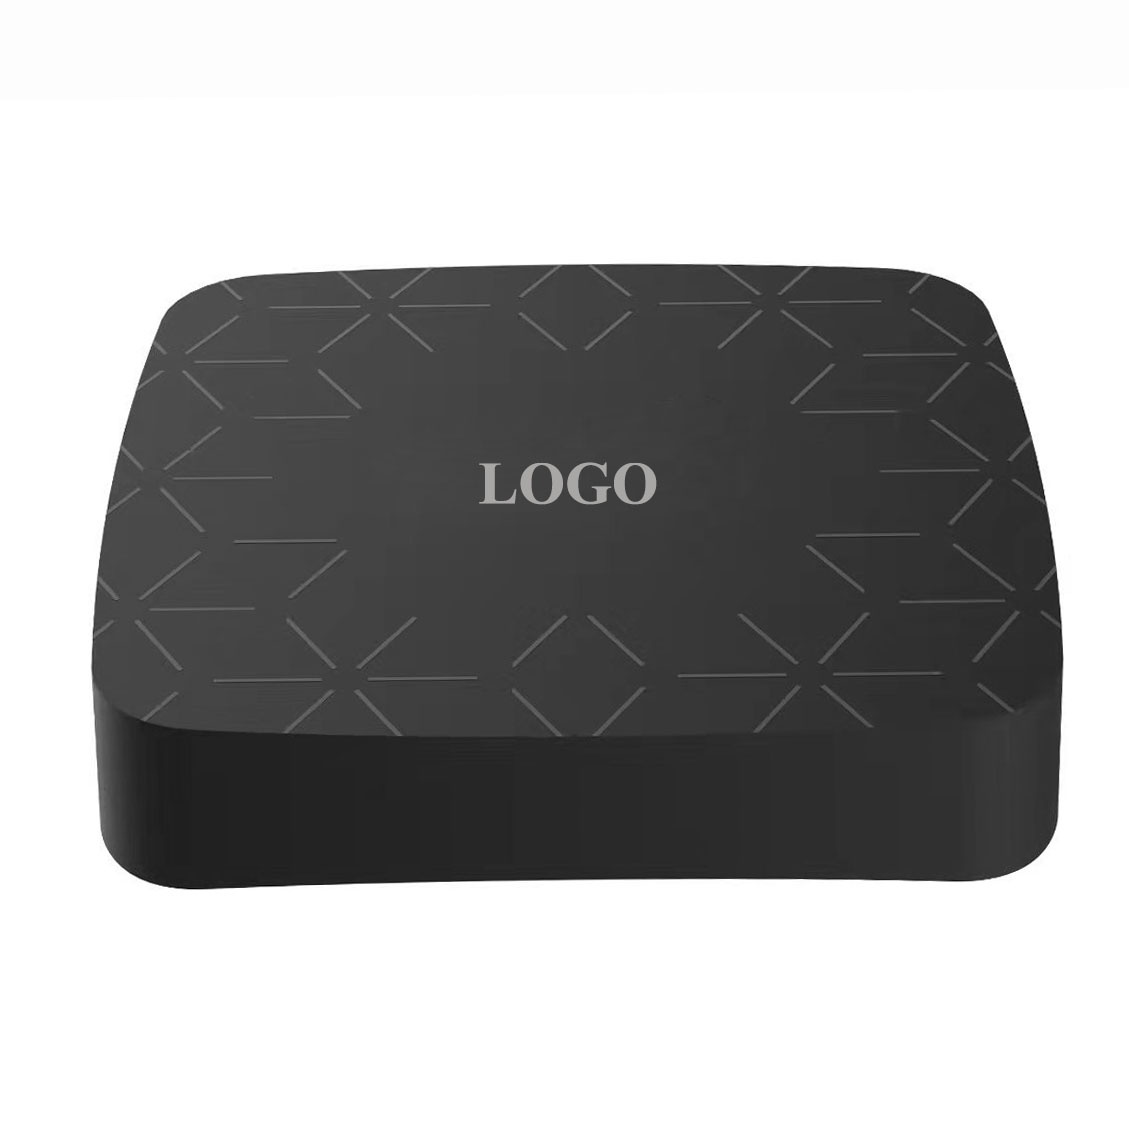 Android TV Box Android 11 Support 4K HDR Smart Streaming Media Player